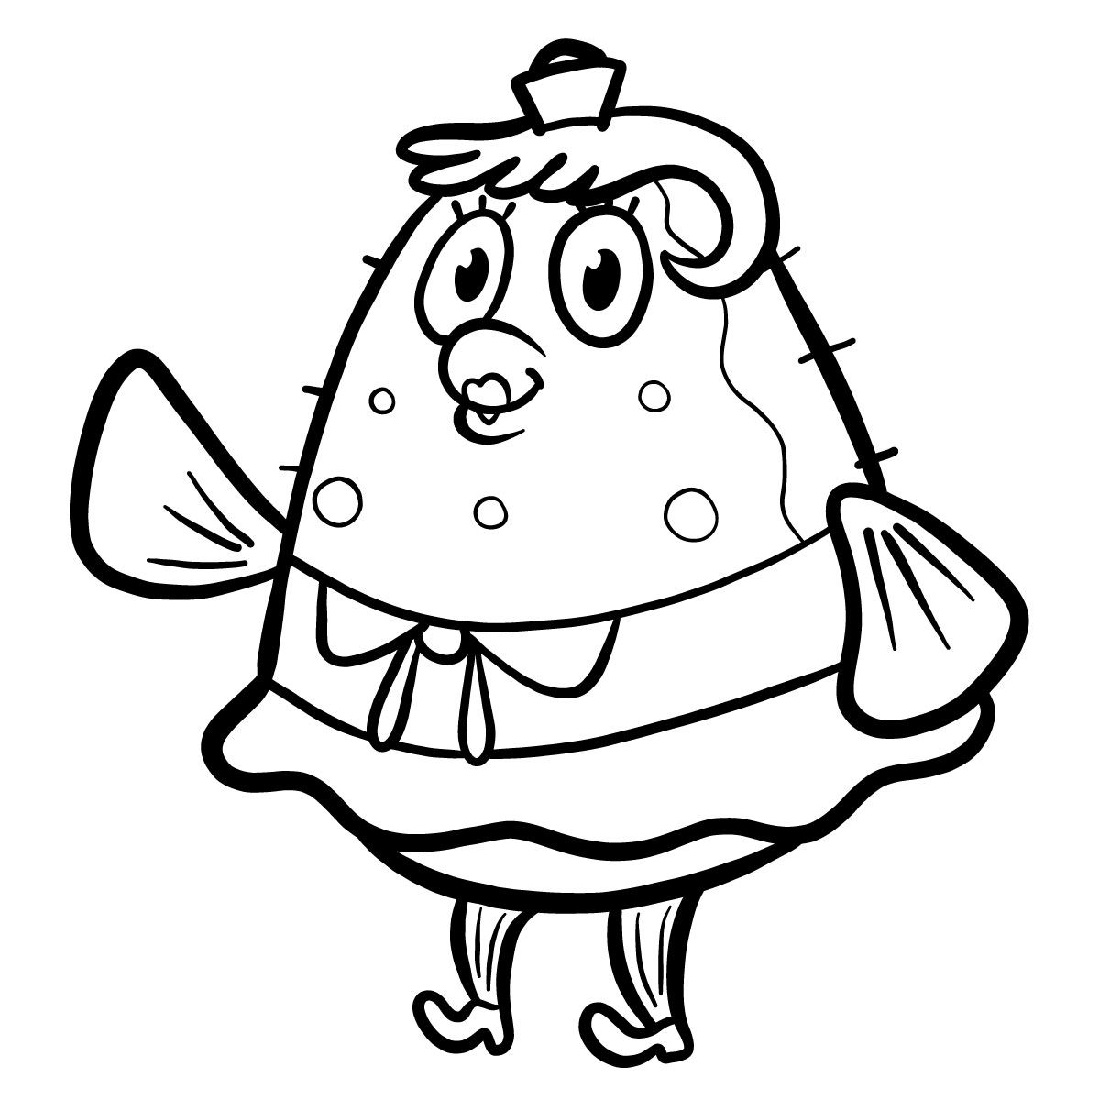 Spongebob Coloring Sheets And Mrs Puff. 